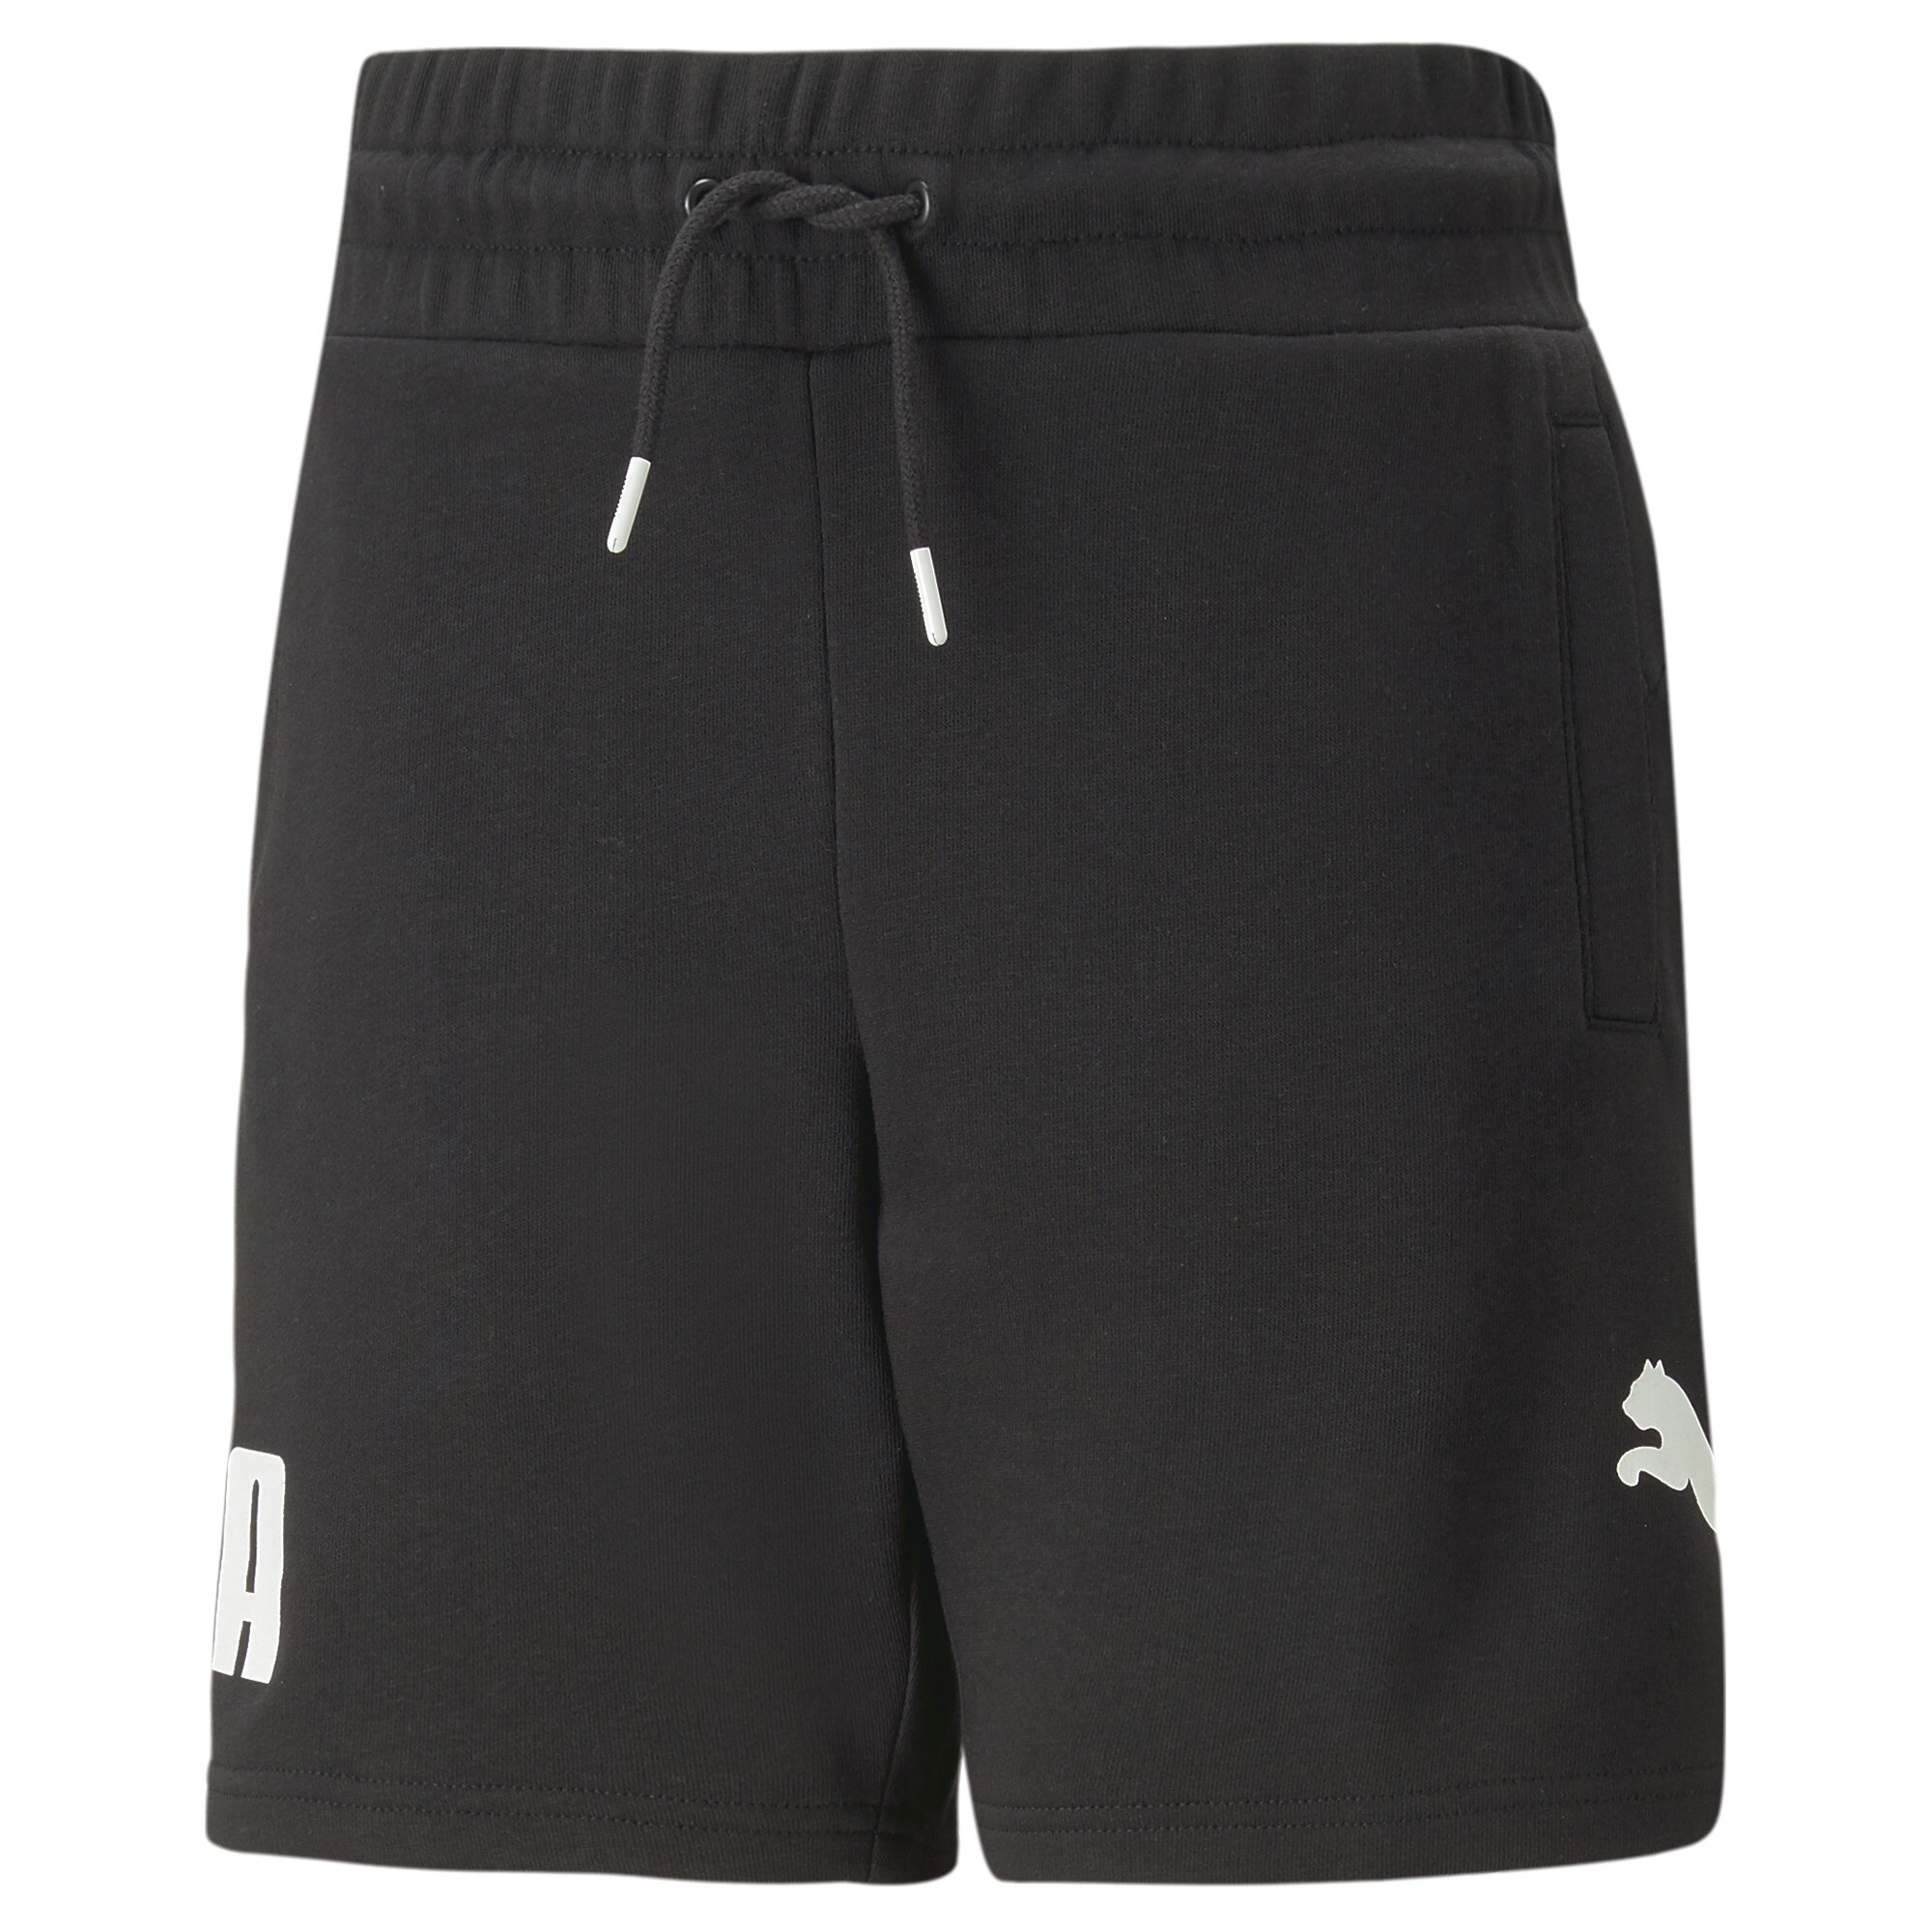 PUMA Power Shorts In Black, Size 11-12 Youth